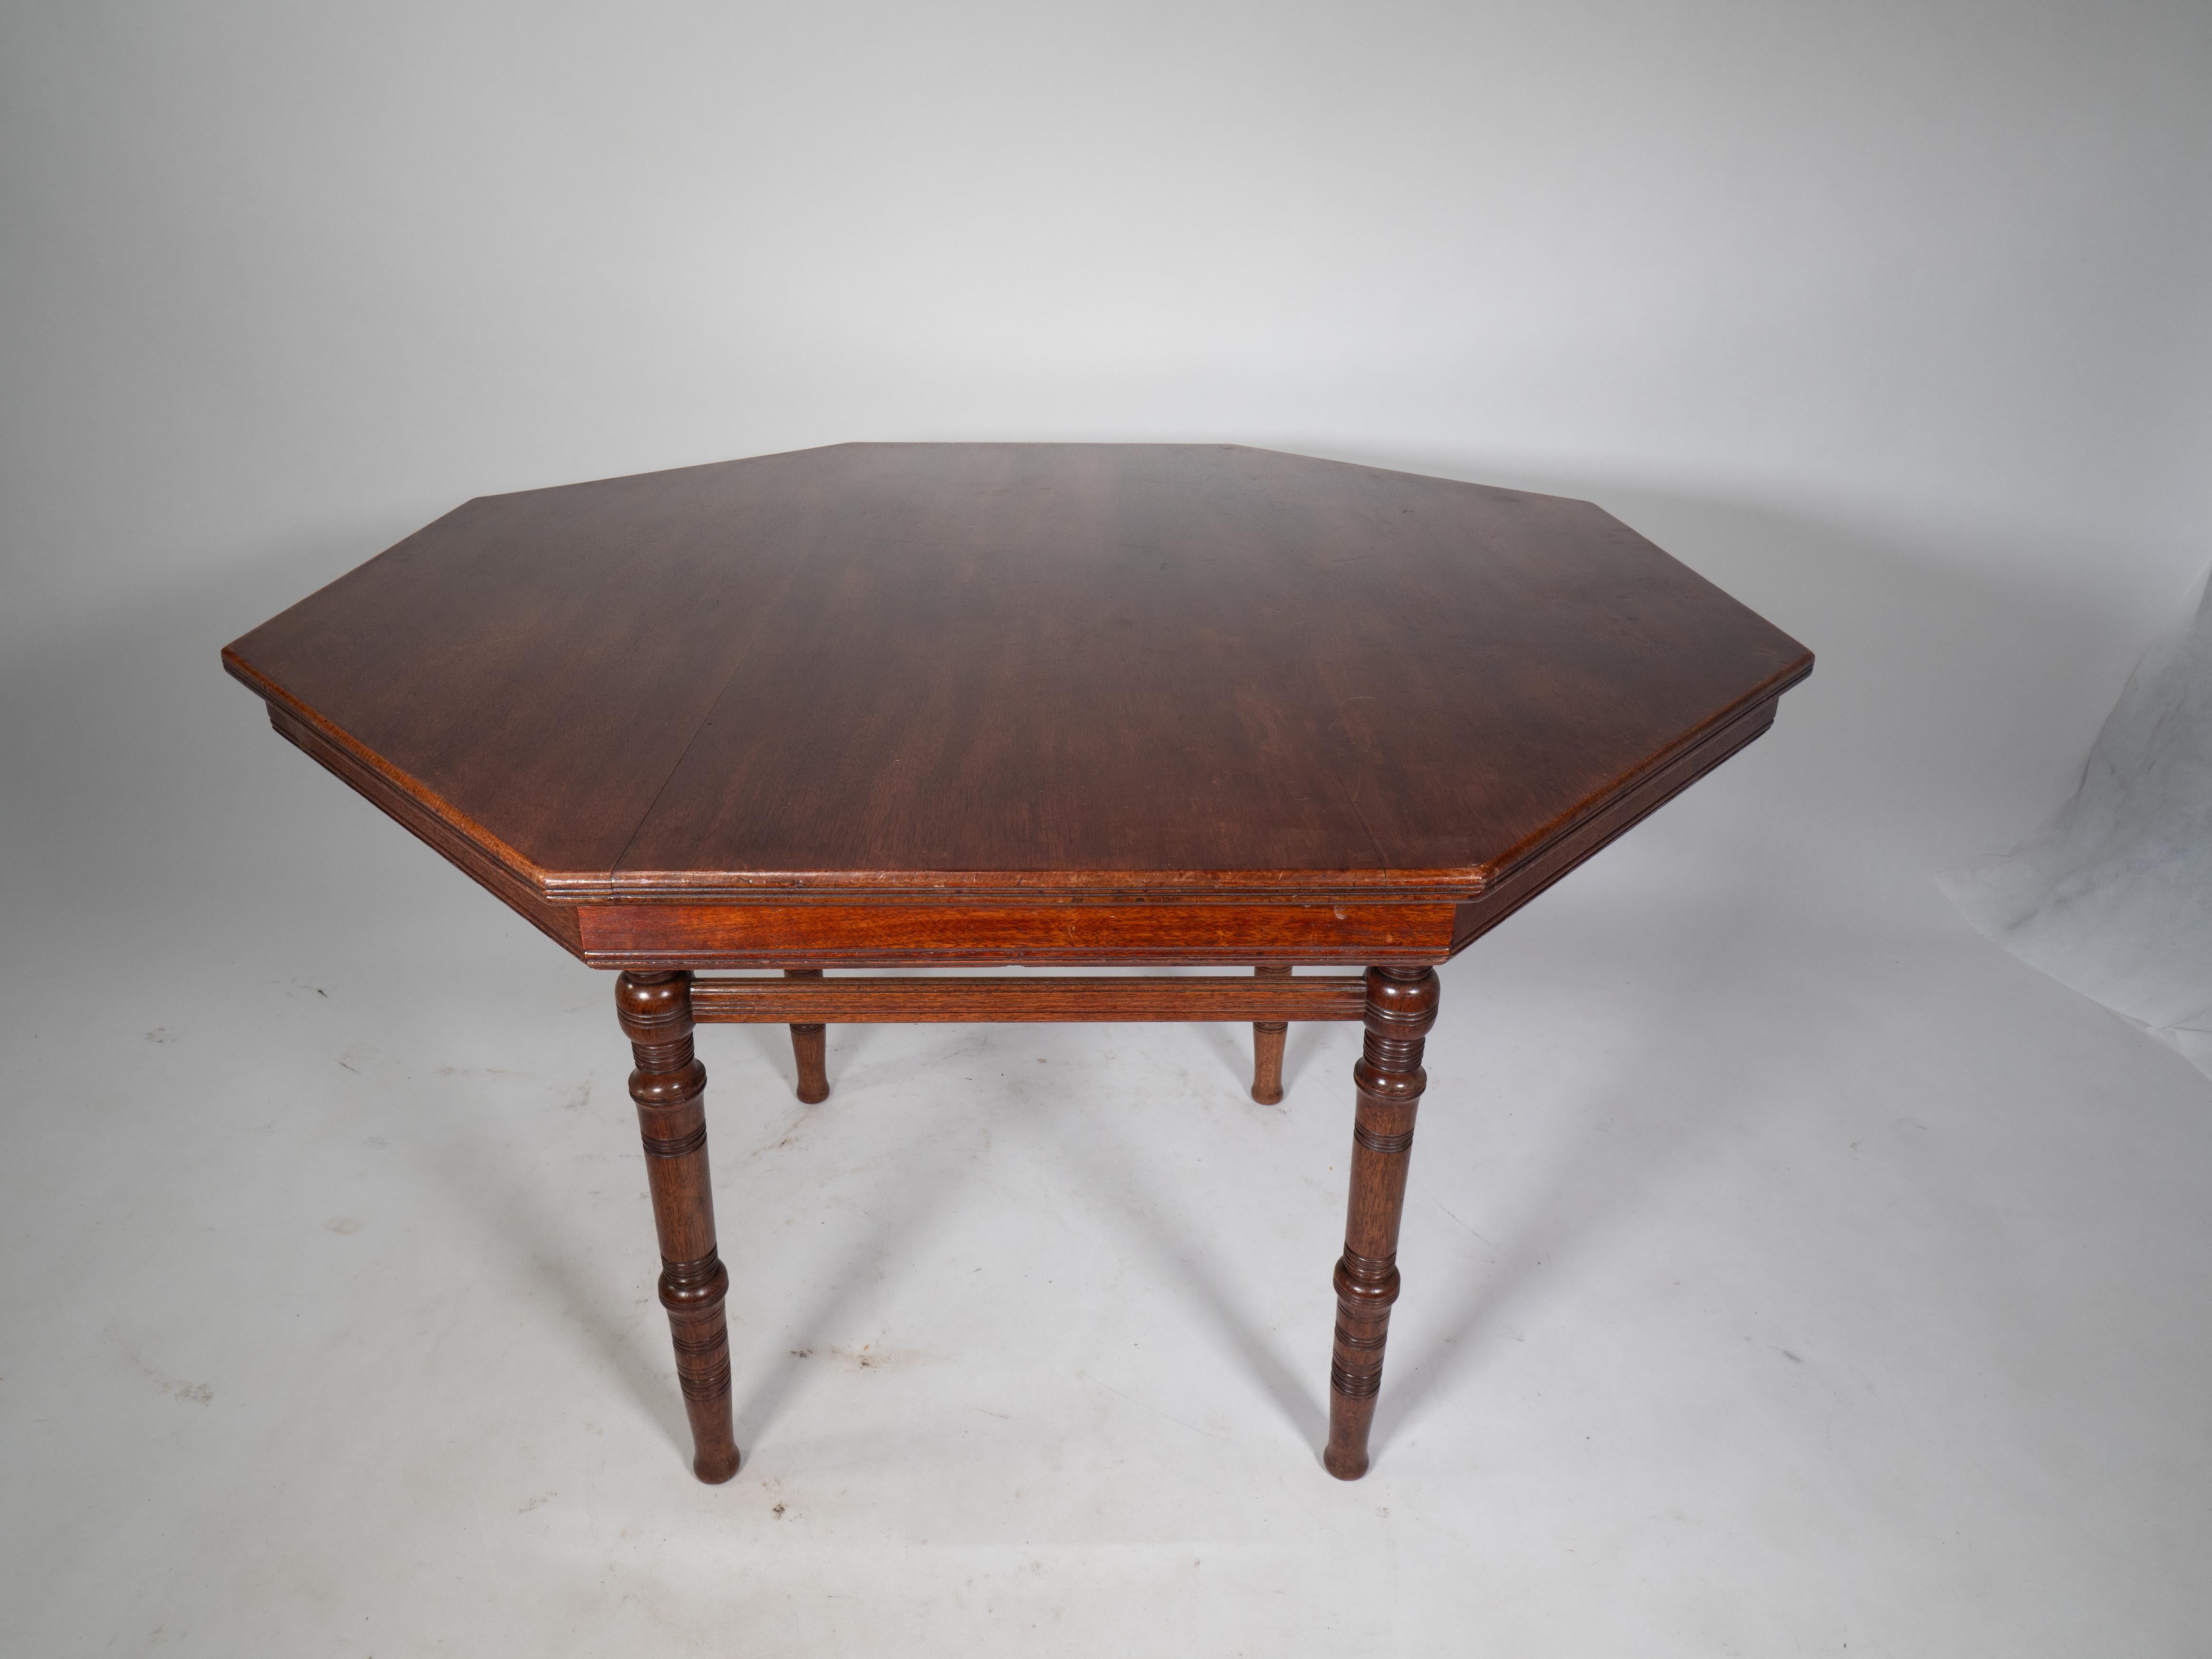 E W Godwin attributed. An Aesthetic Movement Walnut octagonal center table with tramline molded edges with fine turnings to the legs united by a high stretcher and standing on Thebes style legs.